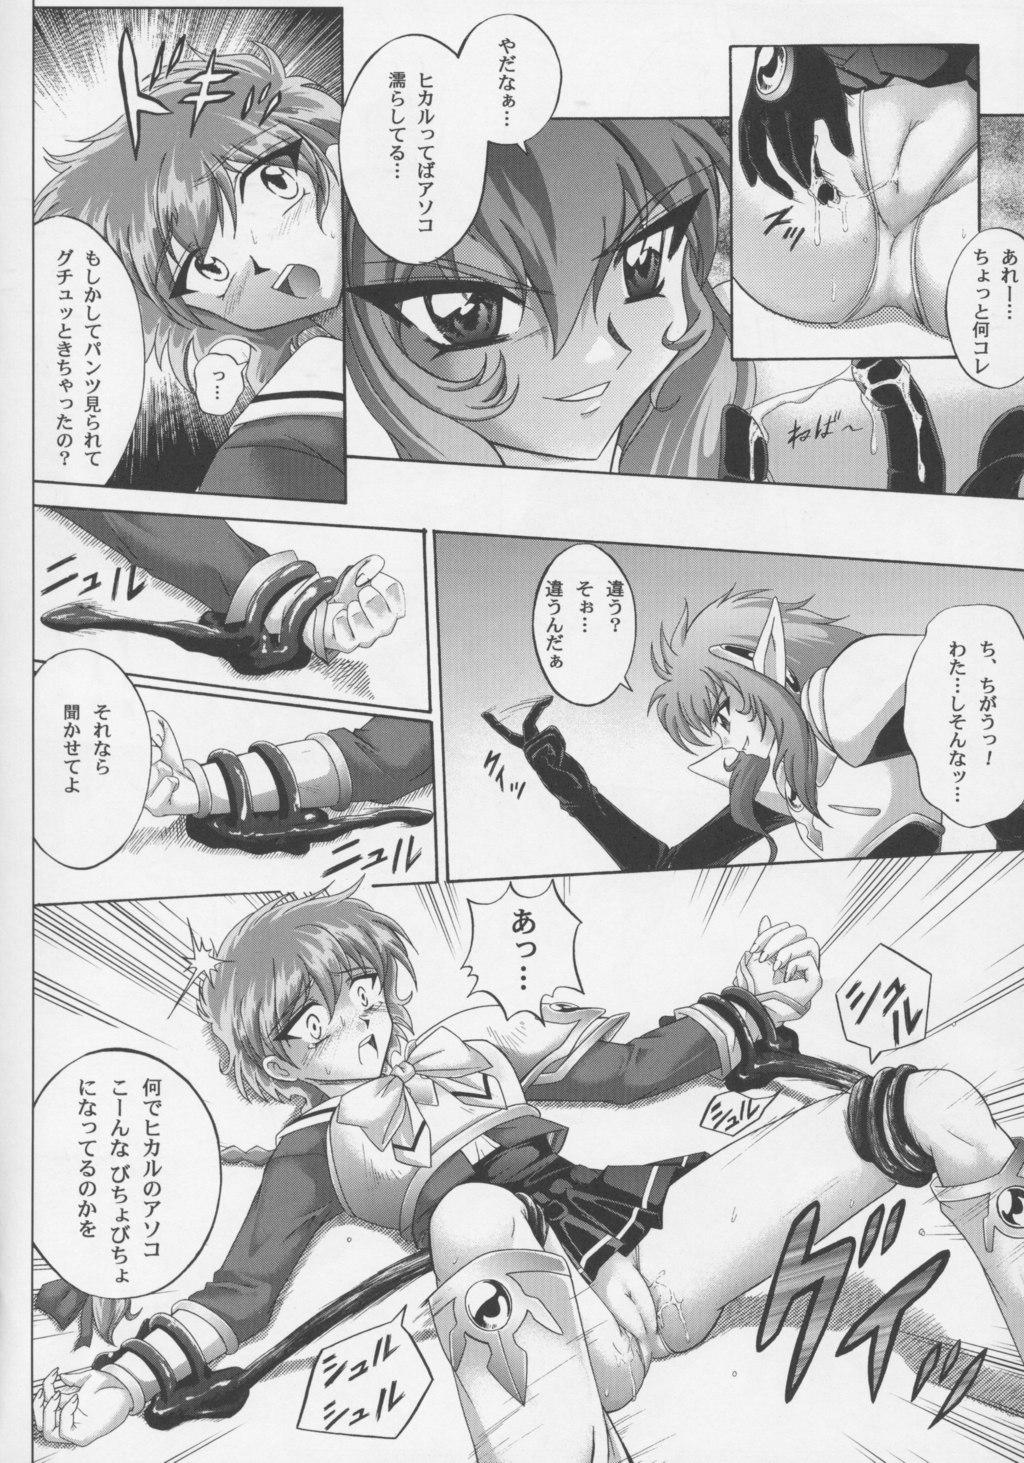 Ball Busting Centris - Magic knight rayearth Horny - Page 11